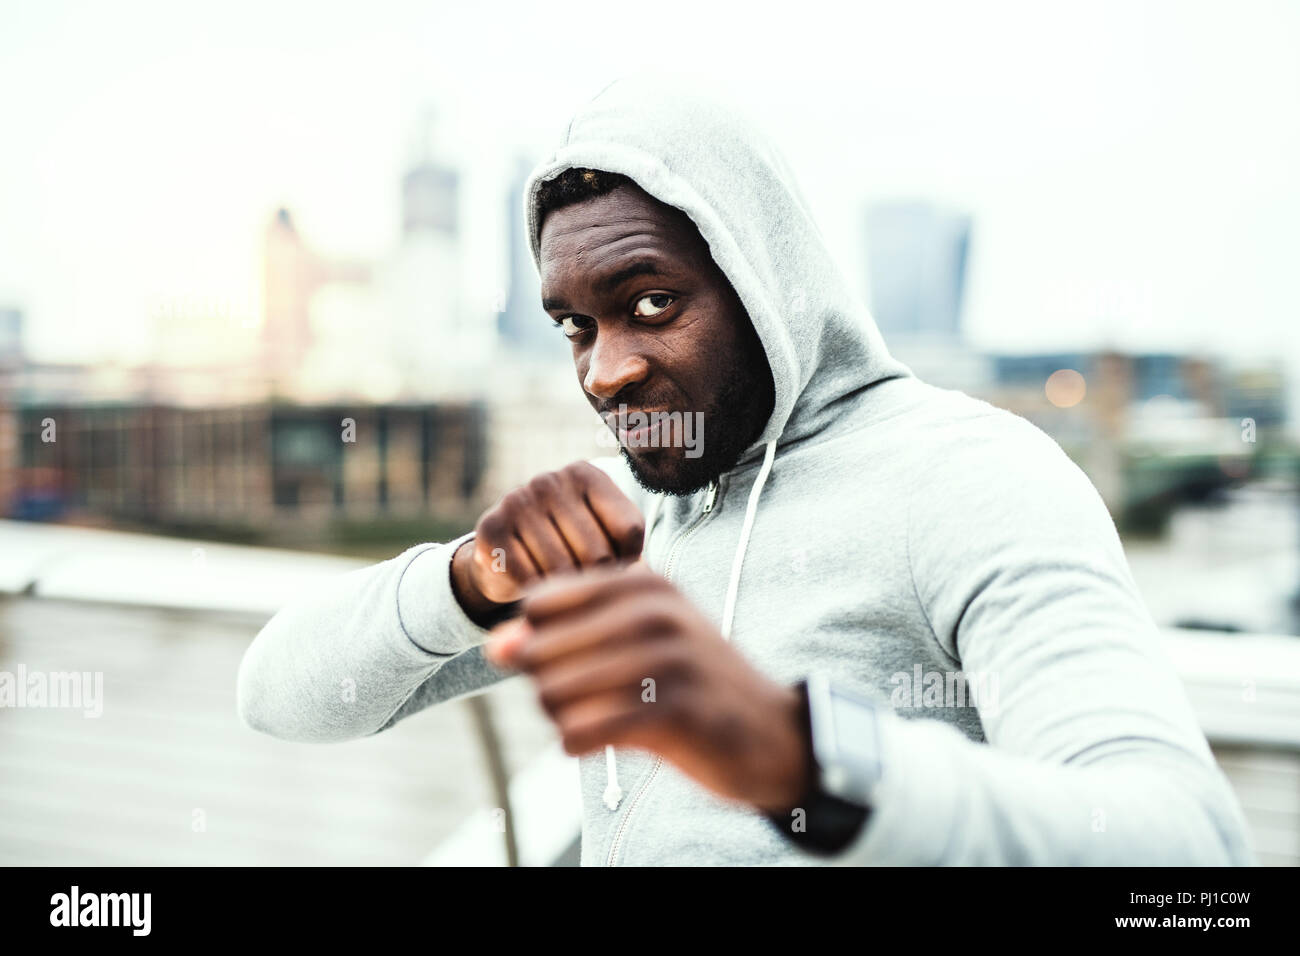 Young active black sportsman in boxing position in a city, wearing hoodie. Stock Photo